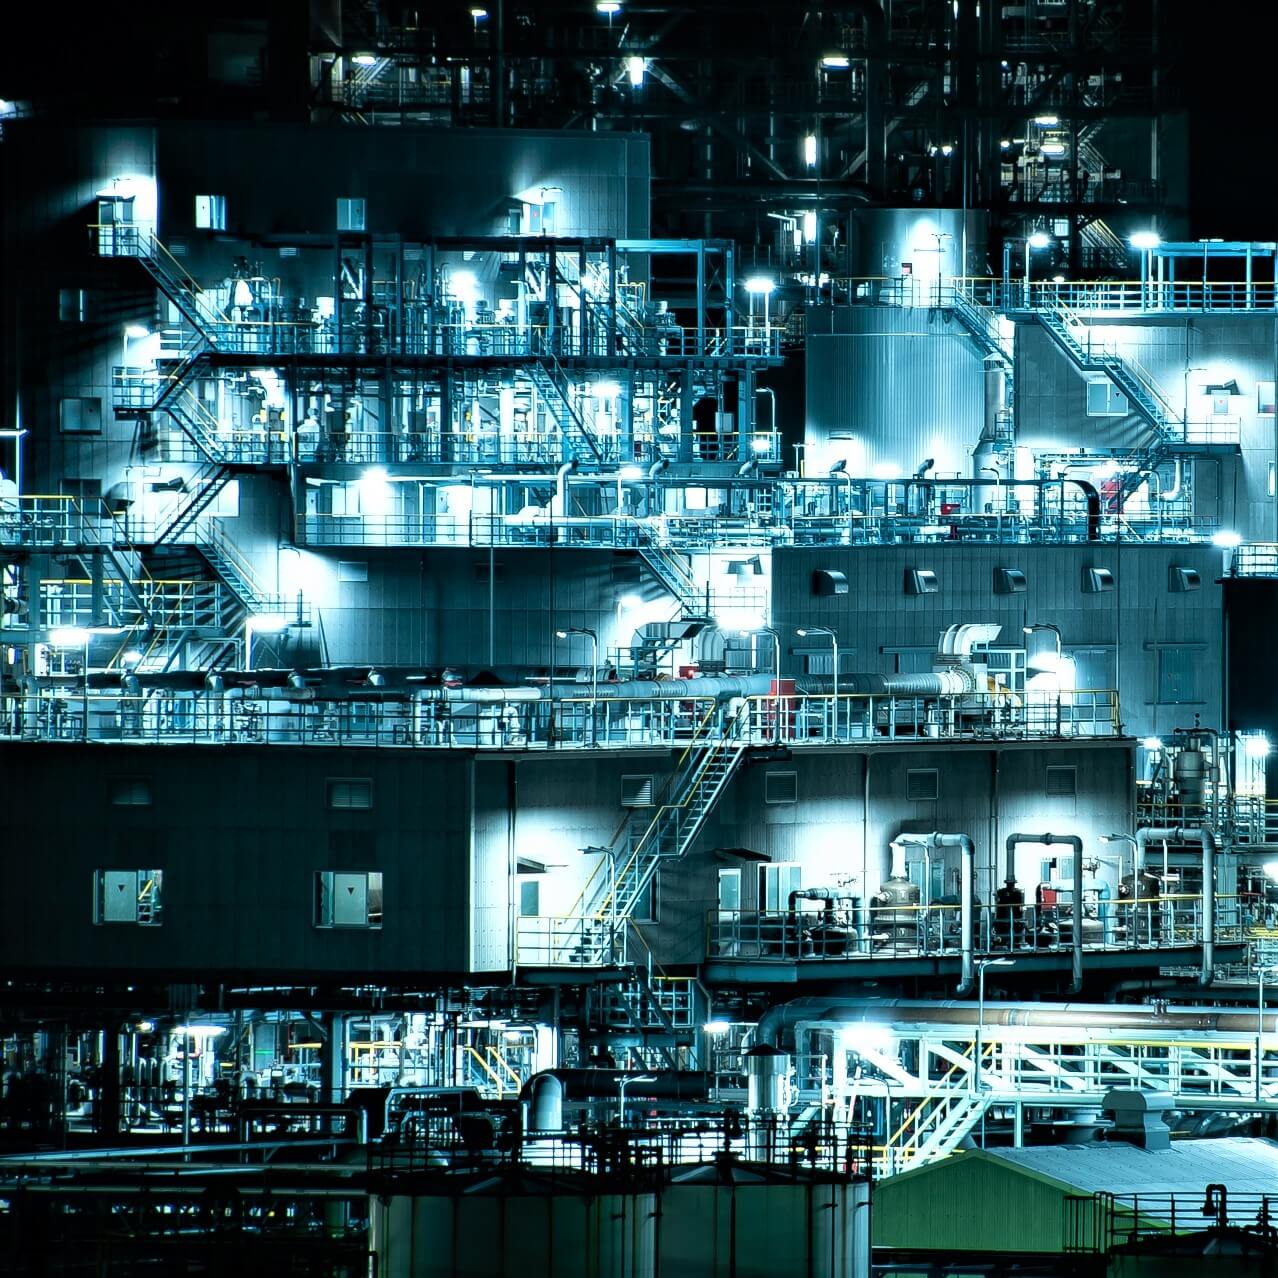 Night view of Japanese factories 8